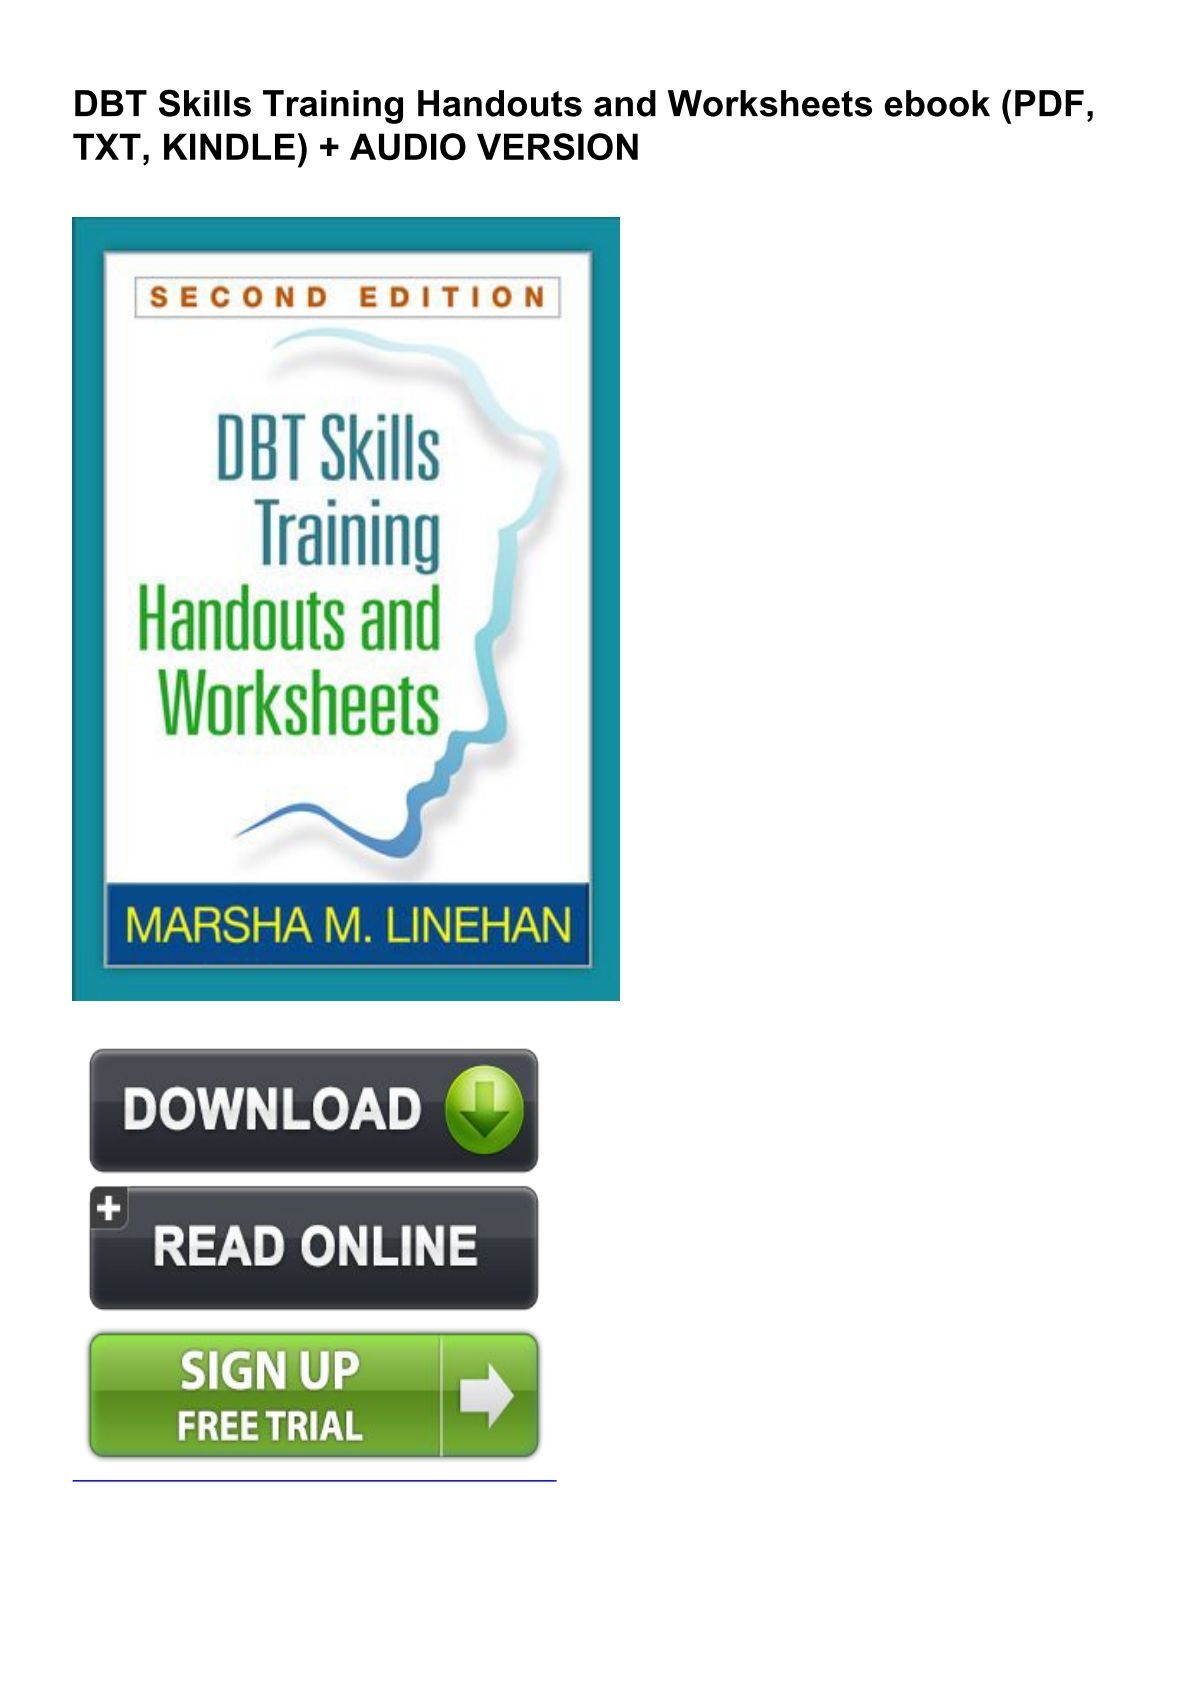 Dbt Skills Training Handouts And Worksheets Free Download